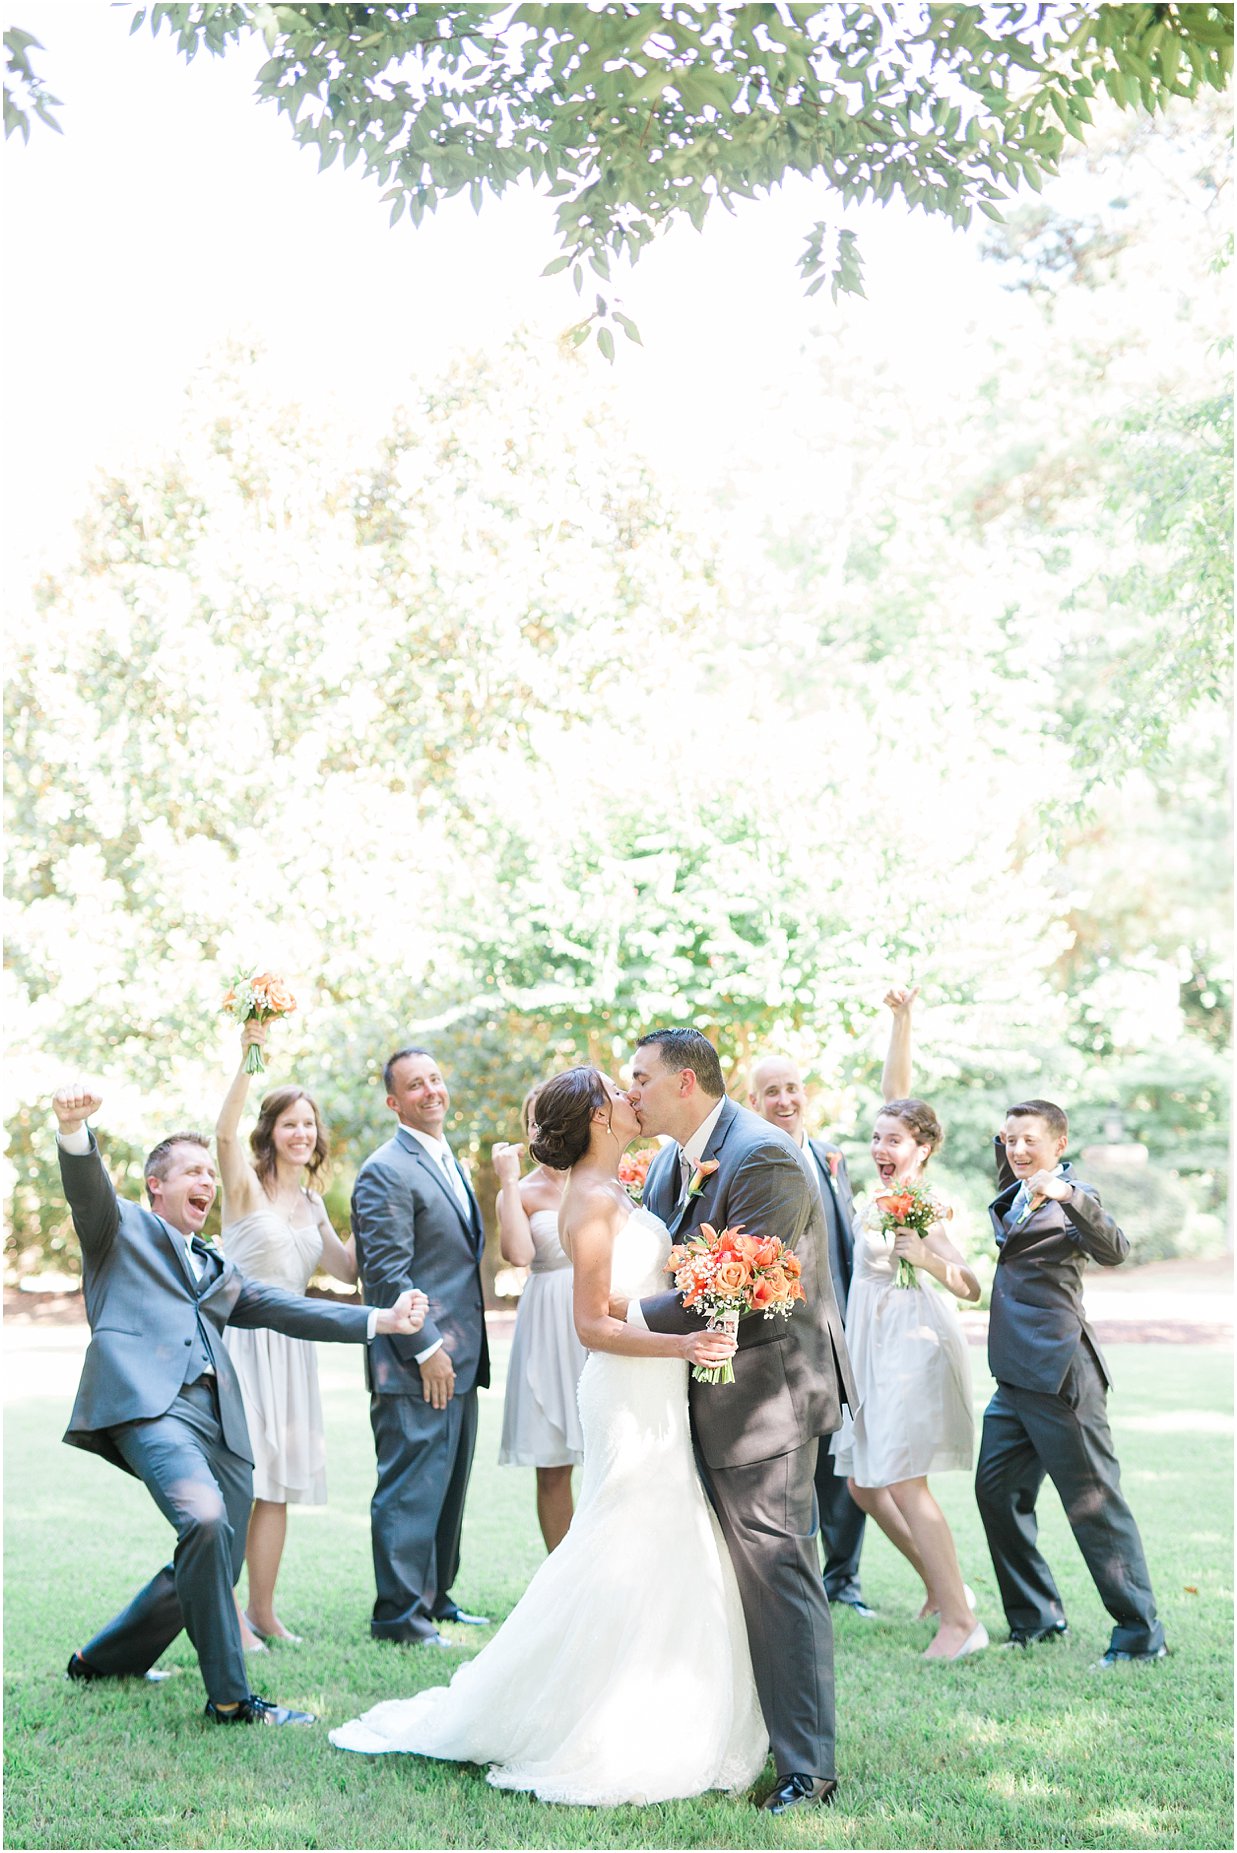 Bridal party orange and gray